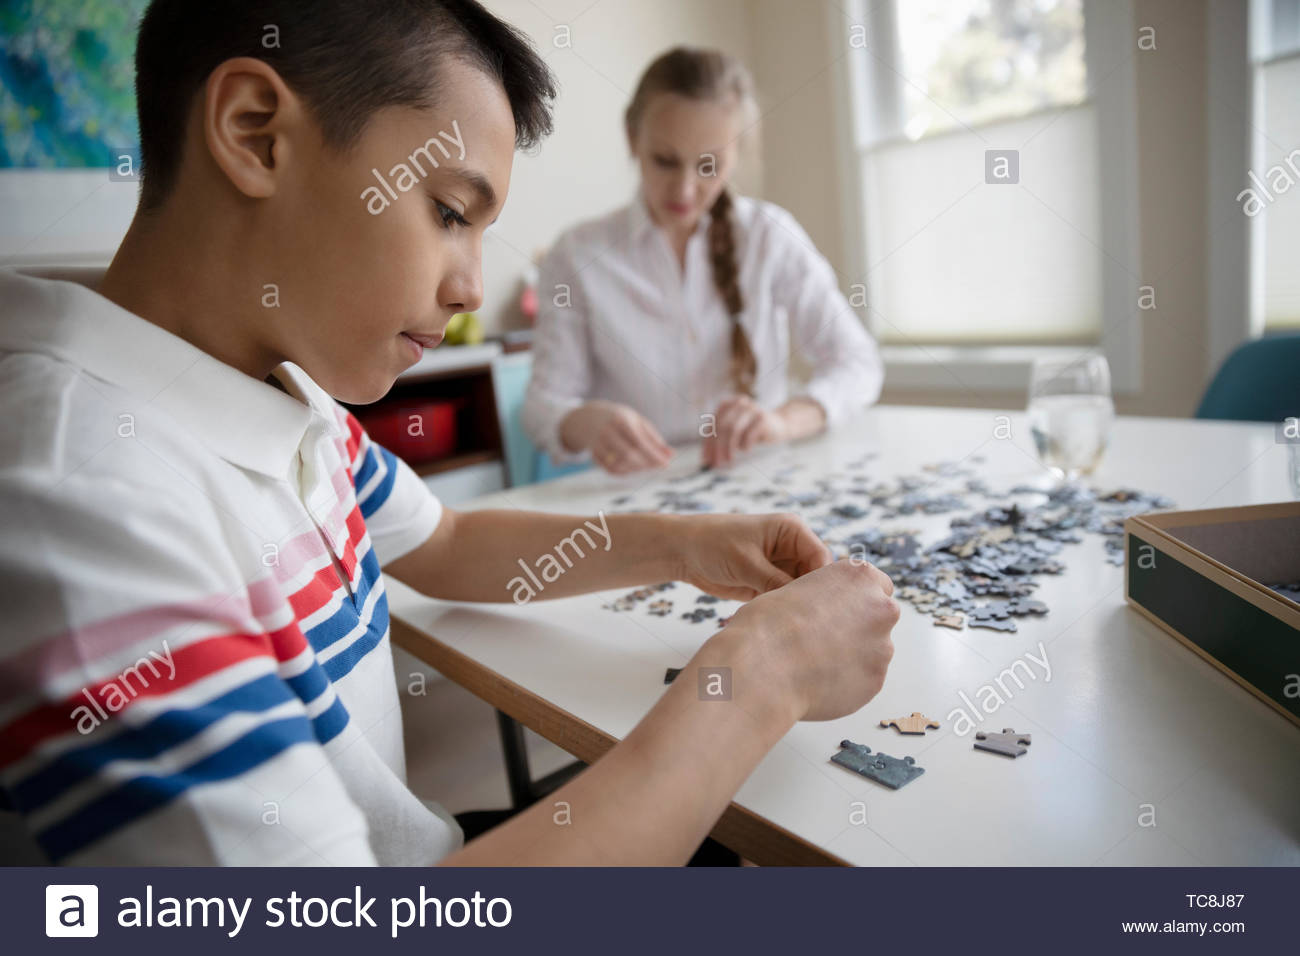 Boy assembling jigsaw puzzle at table Stock Photo